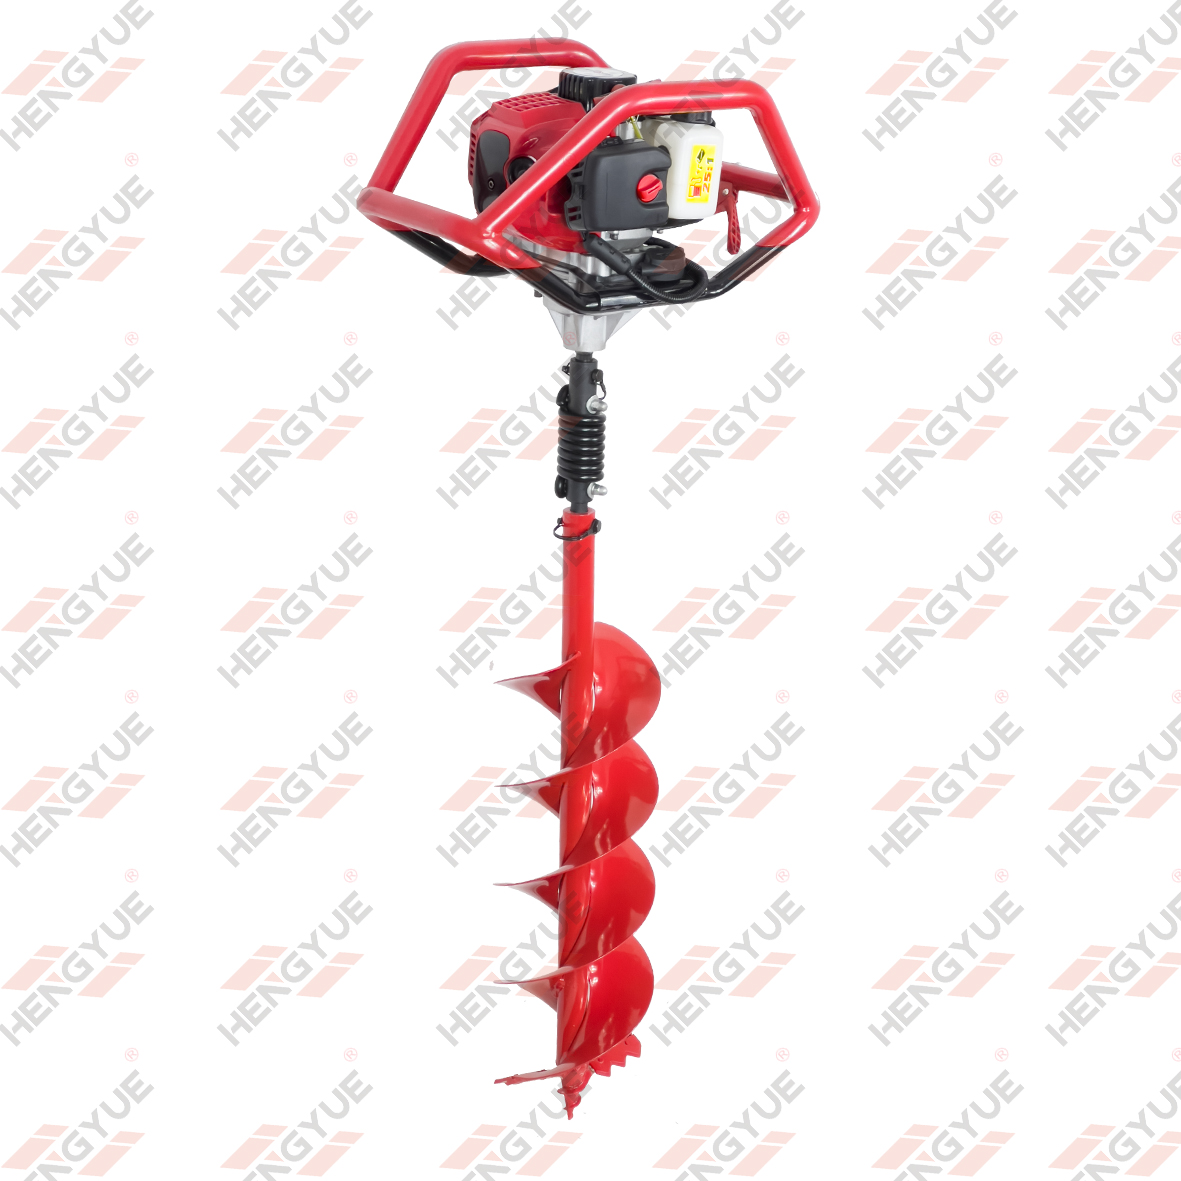  1 or 2 man operate new desing earth auger powered by HONDA GX35